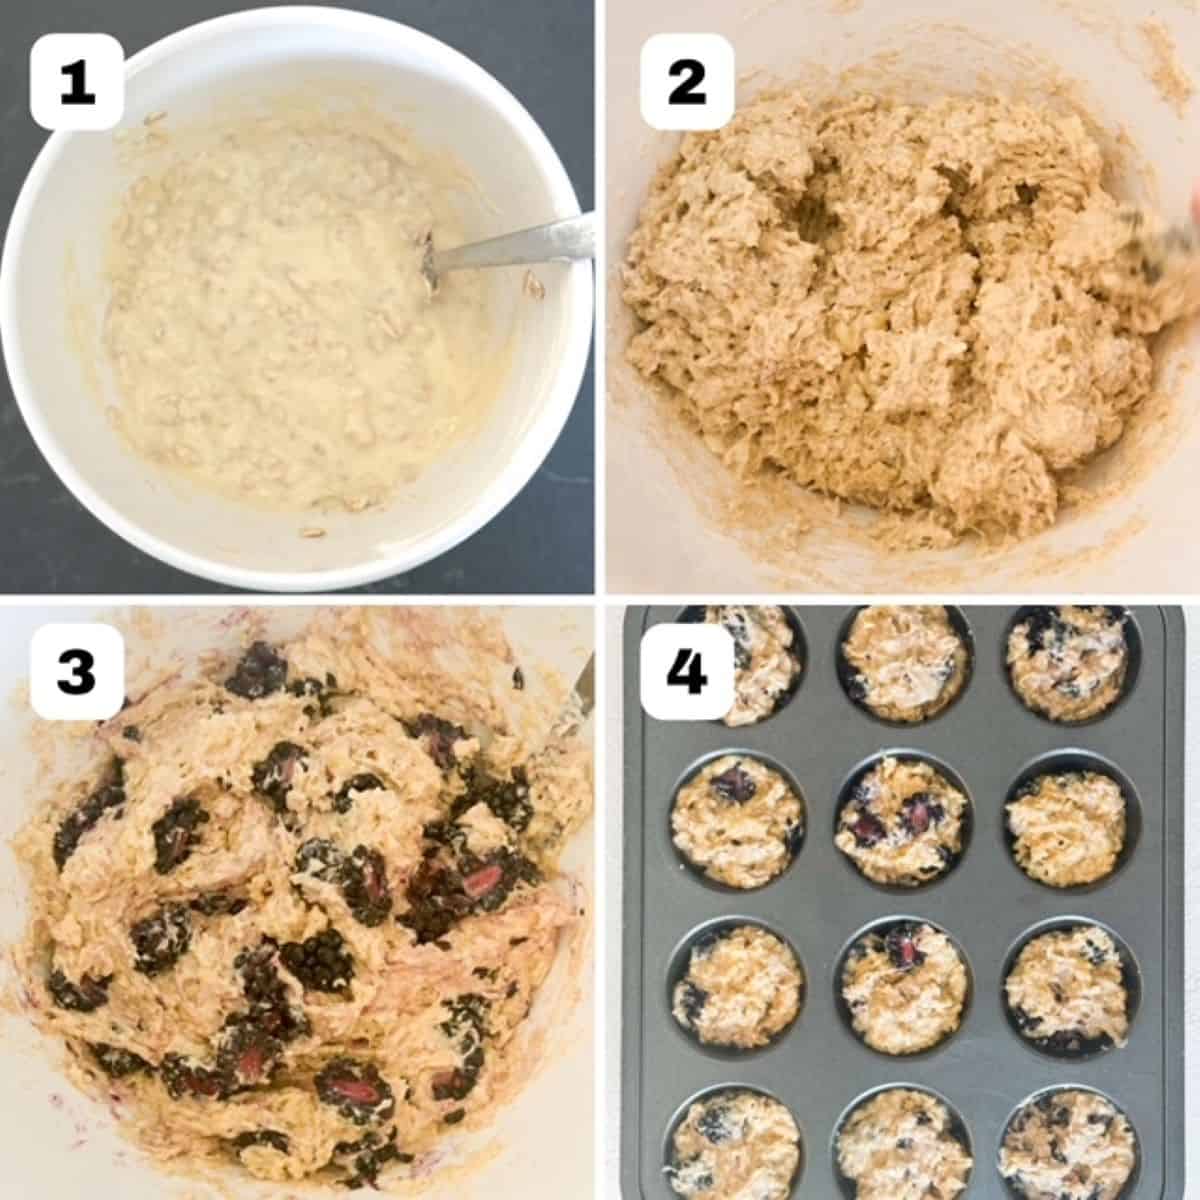 Four numbered images showing steps on how to make Blackberry Banana Oatmeal Muffins.